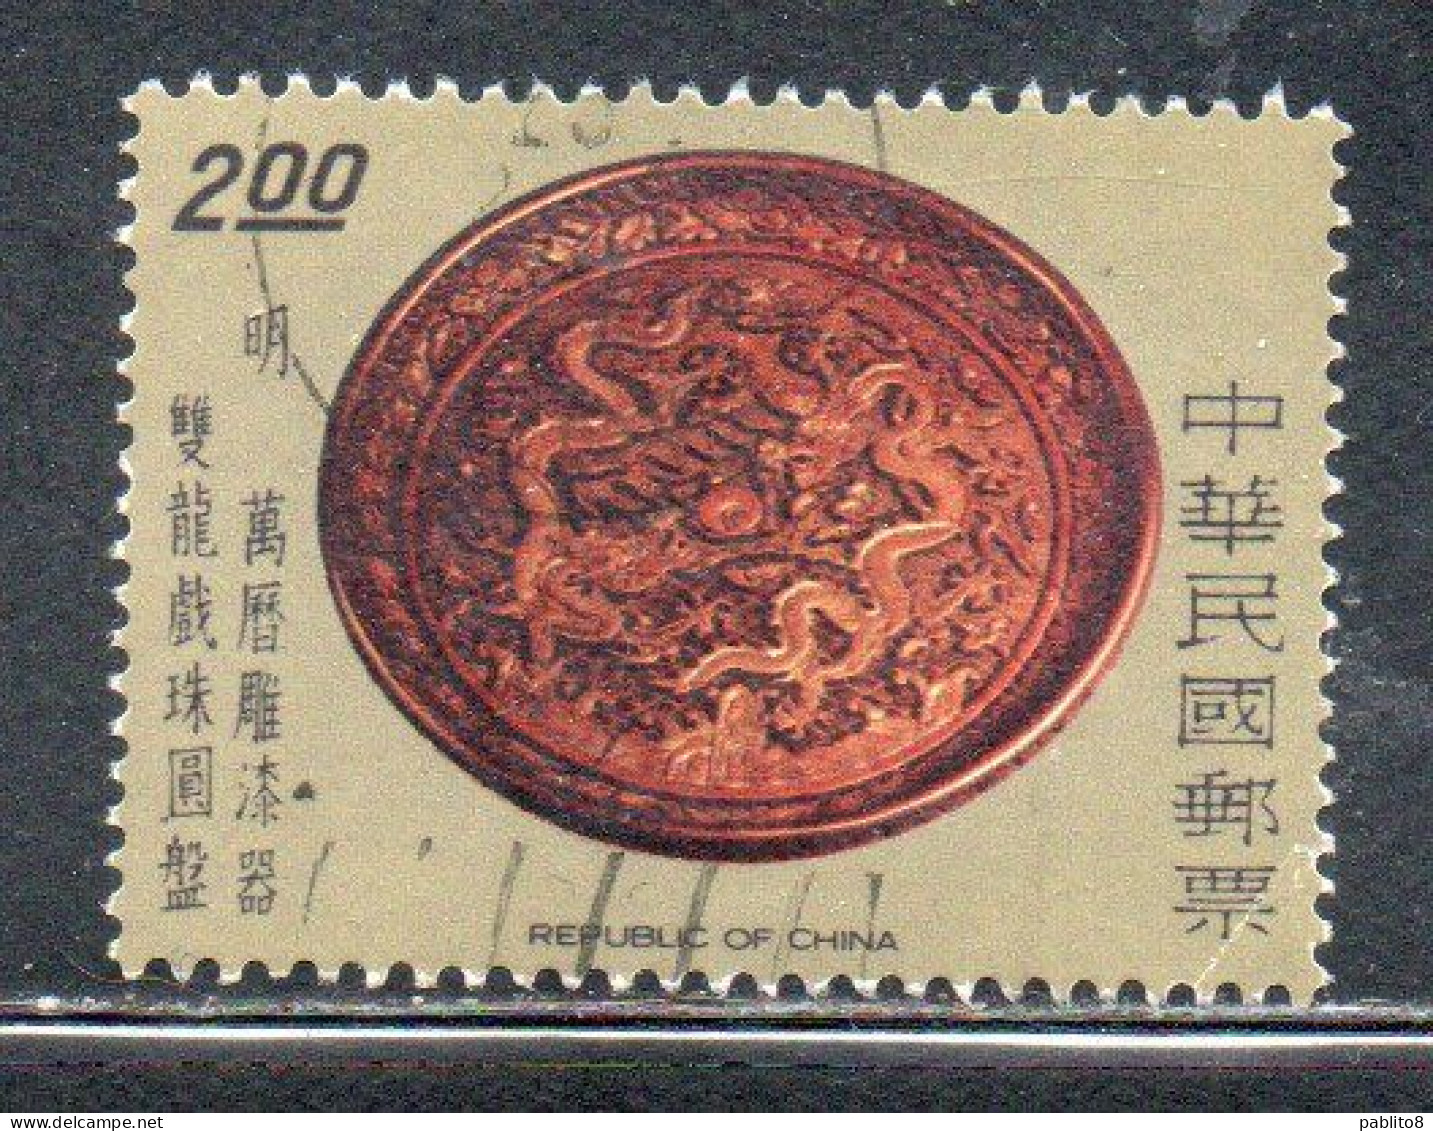 CHINA REPUBLIC CINA TAIWAN FORMOSA 1977 ANCIENT CARVED LACQUER WARE PLATE WAN-LI 2$ USED USATO OBLITERE' - Used Stamps